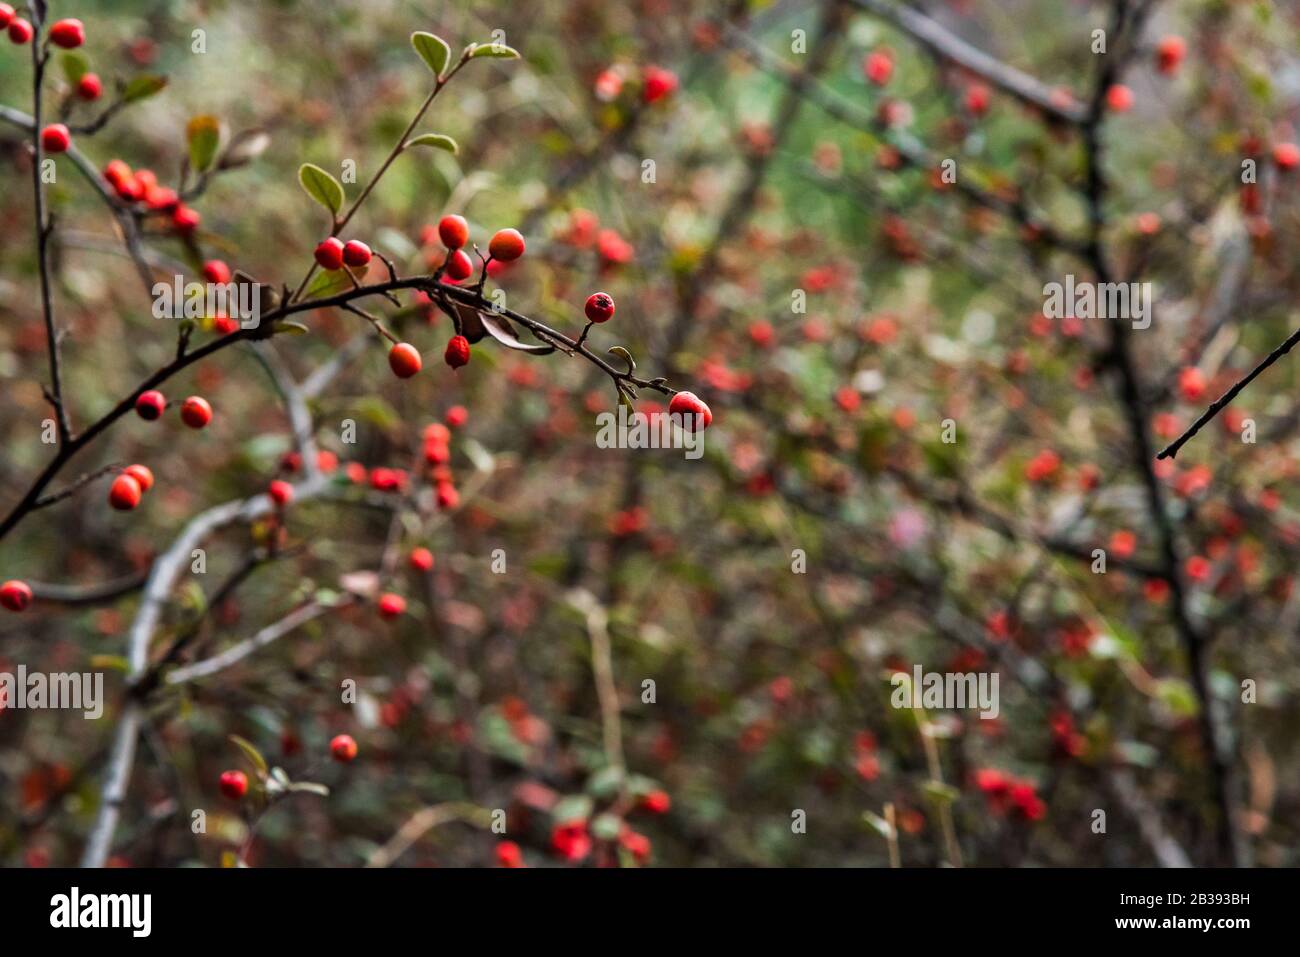 Branches of a bush filled with red berries on them Stock Photo